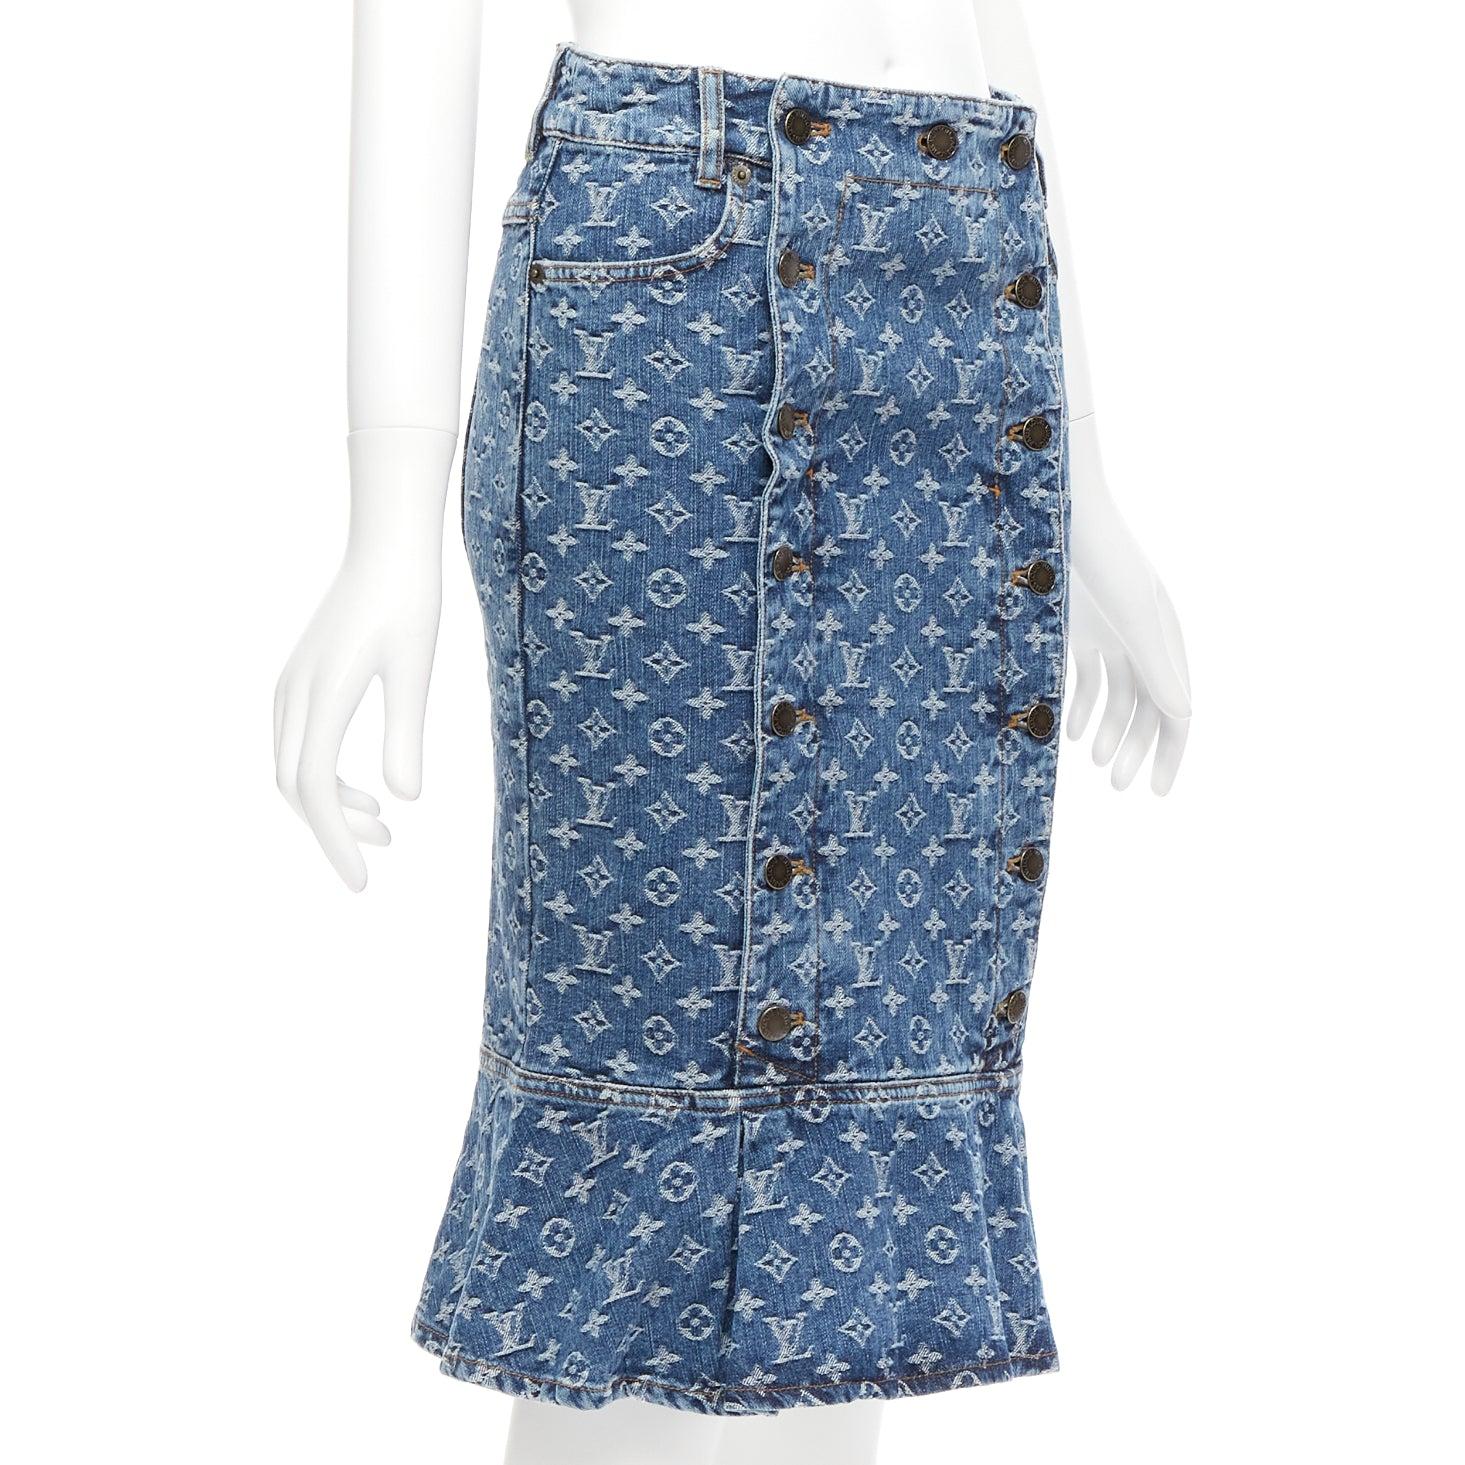 LOUIS VUITTON 2007 blue denim LV monogram sailor button skirt FR36 S
Reference: TGAS/D00909
Brand: Louis Vuitton
Designer: Marc Jacobs
Collection: AW 2007
Material: Denim
Color: Blue
Pattern: Monogram
Closure: Button
Extra Details: Double breasted